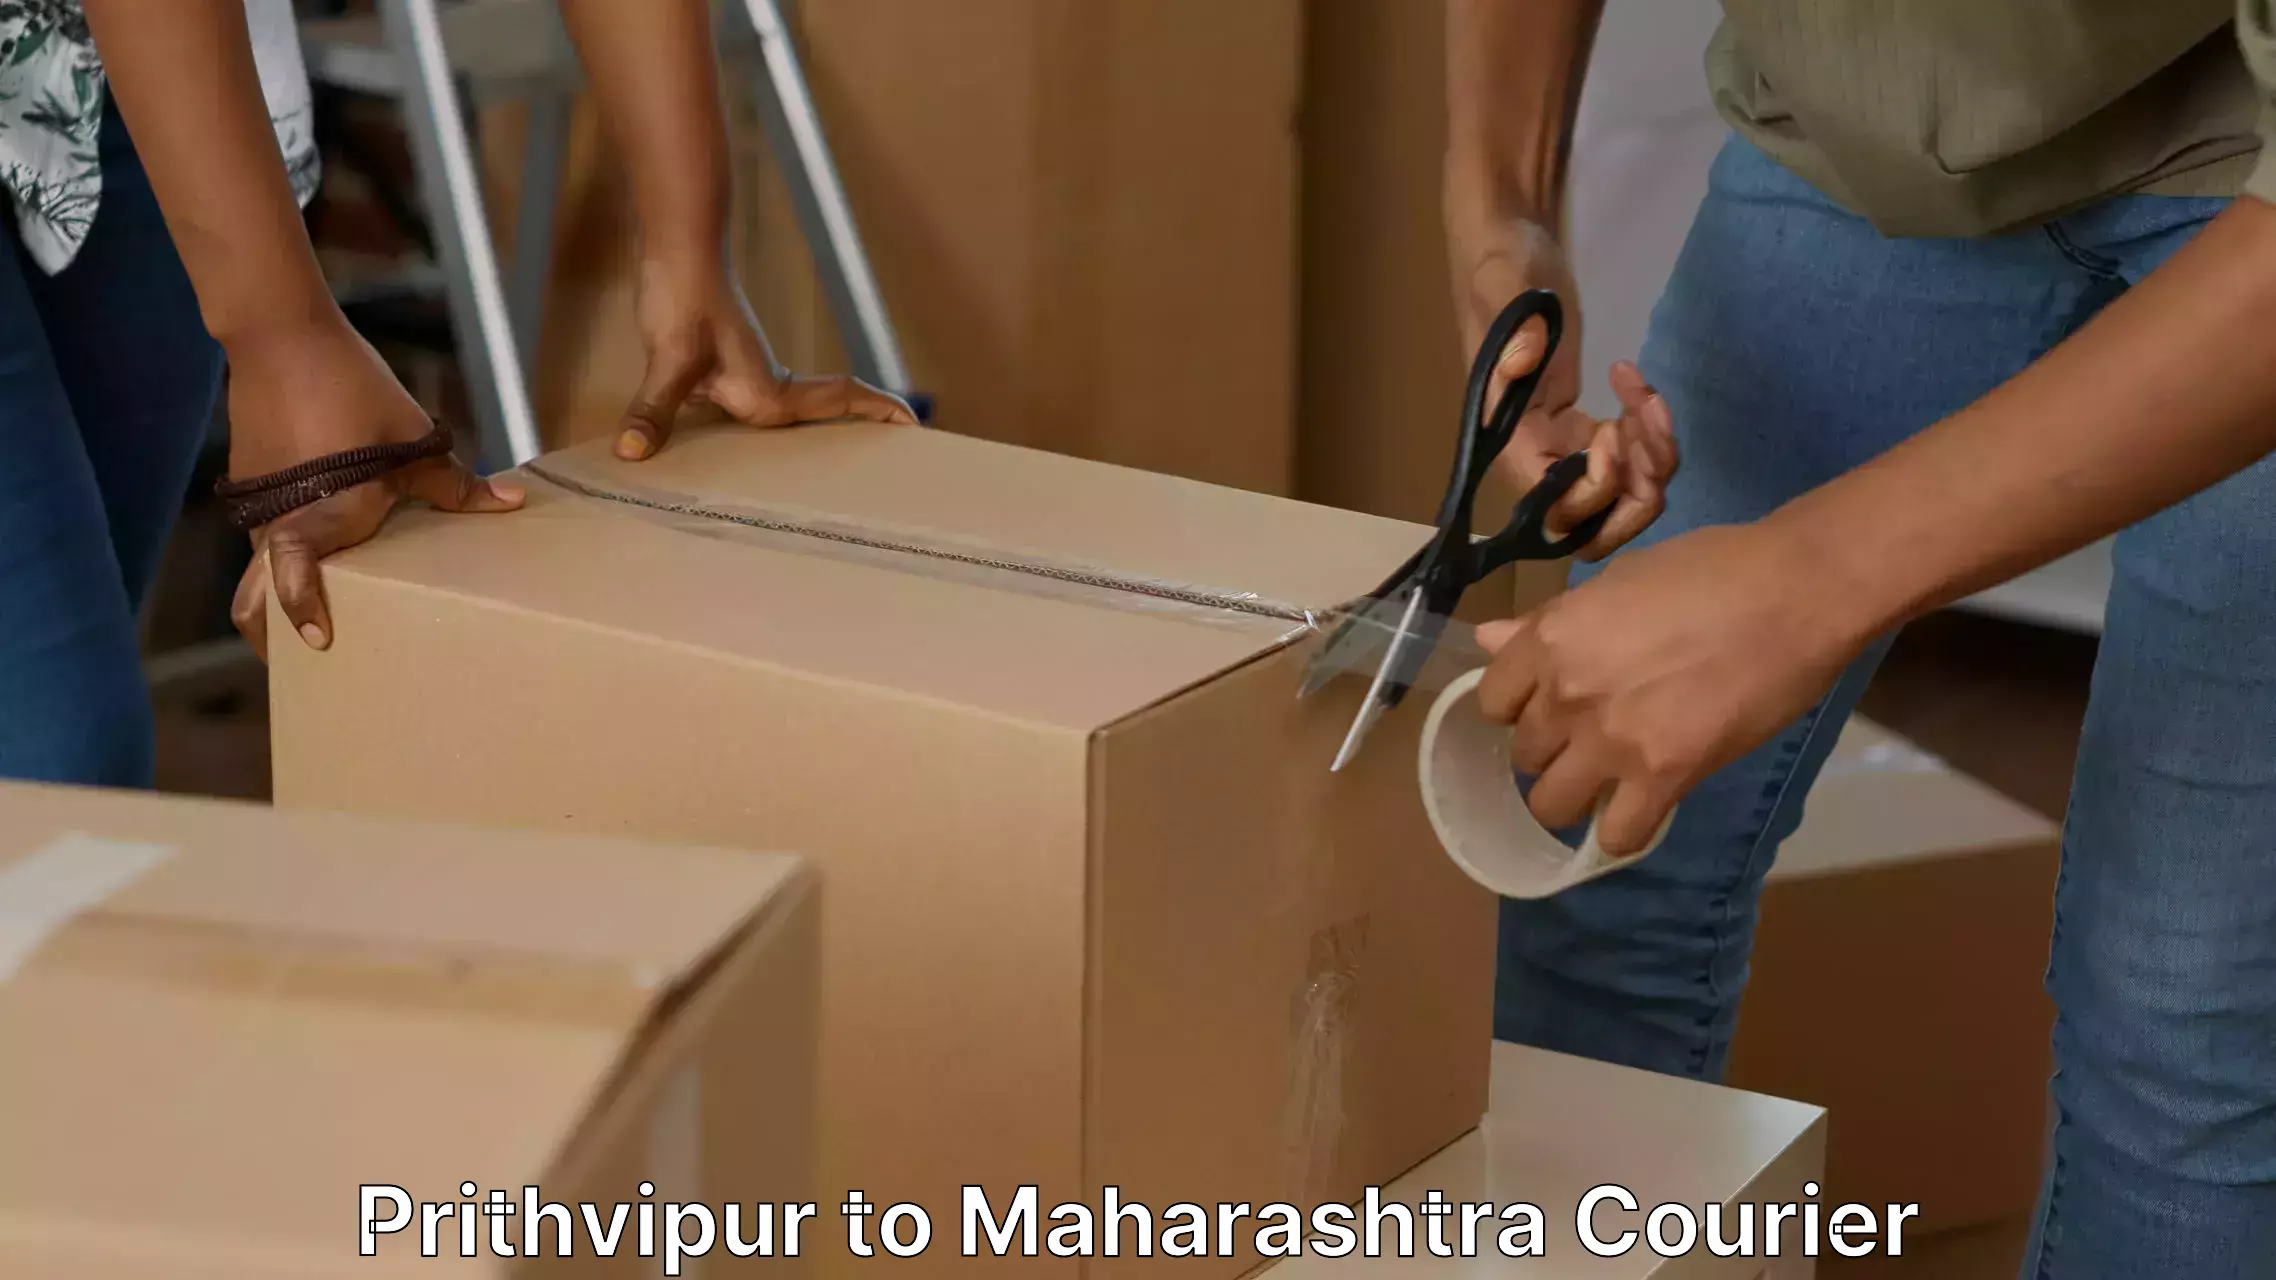 Furniture relocation experts Prithvipur to Kalbadevi